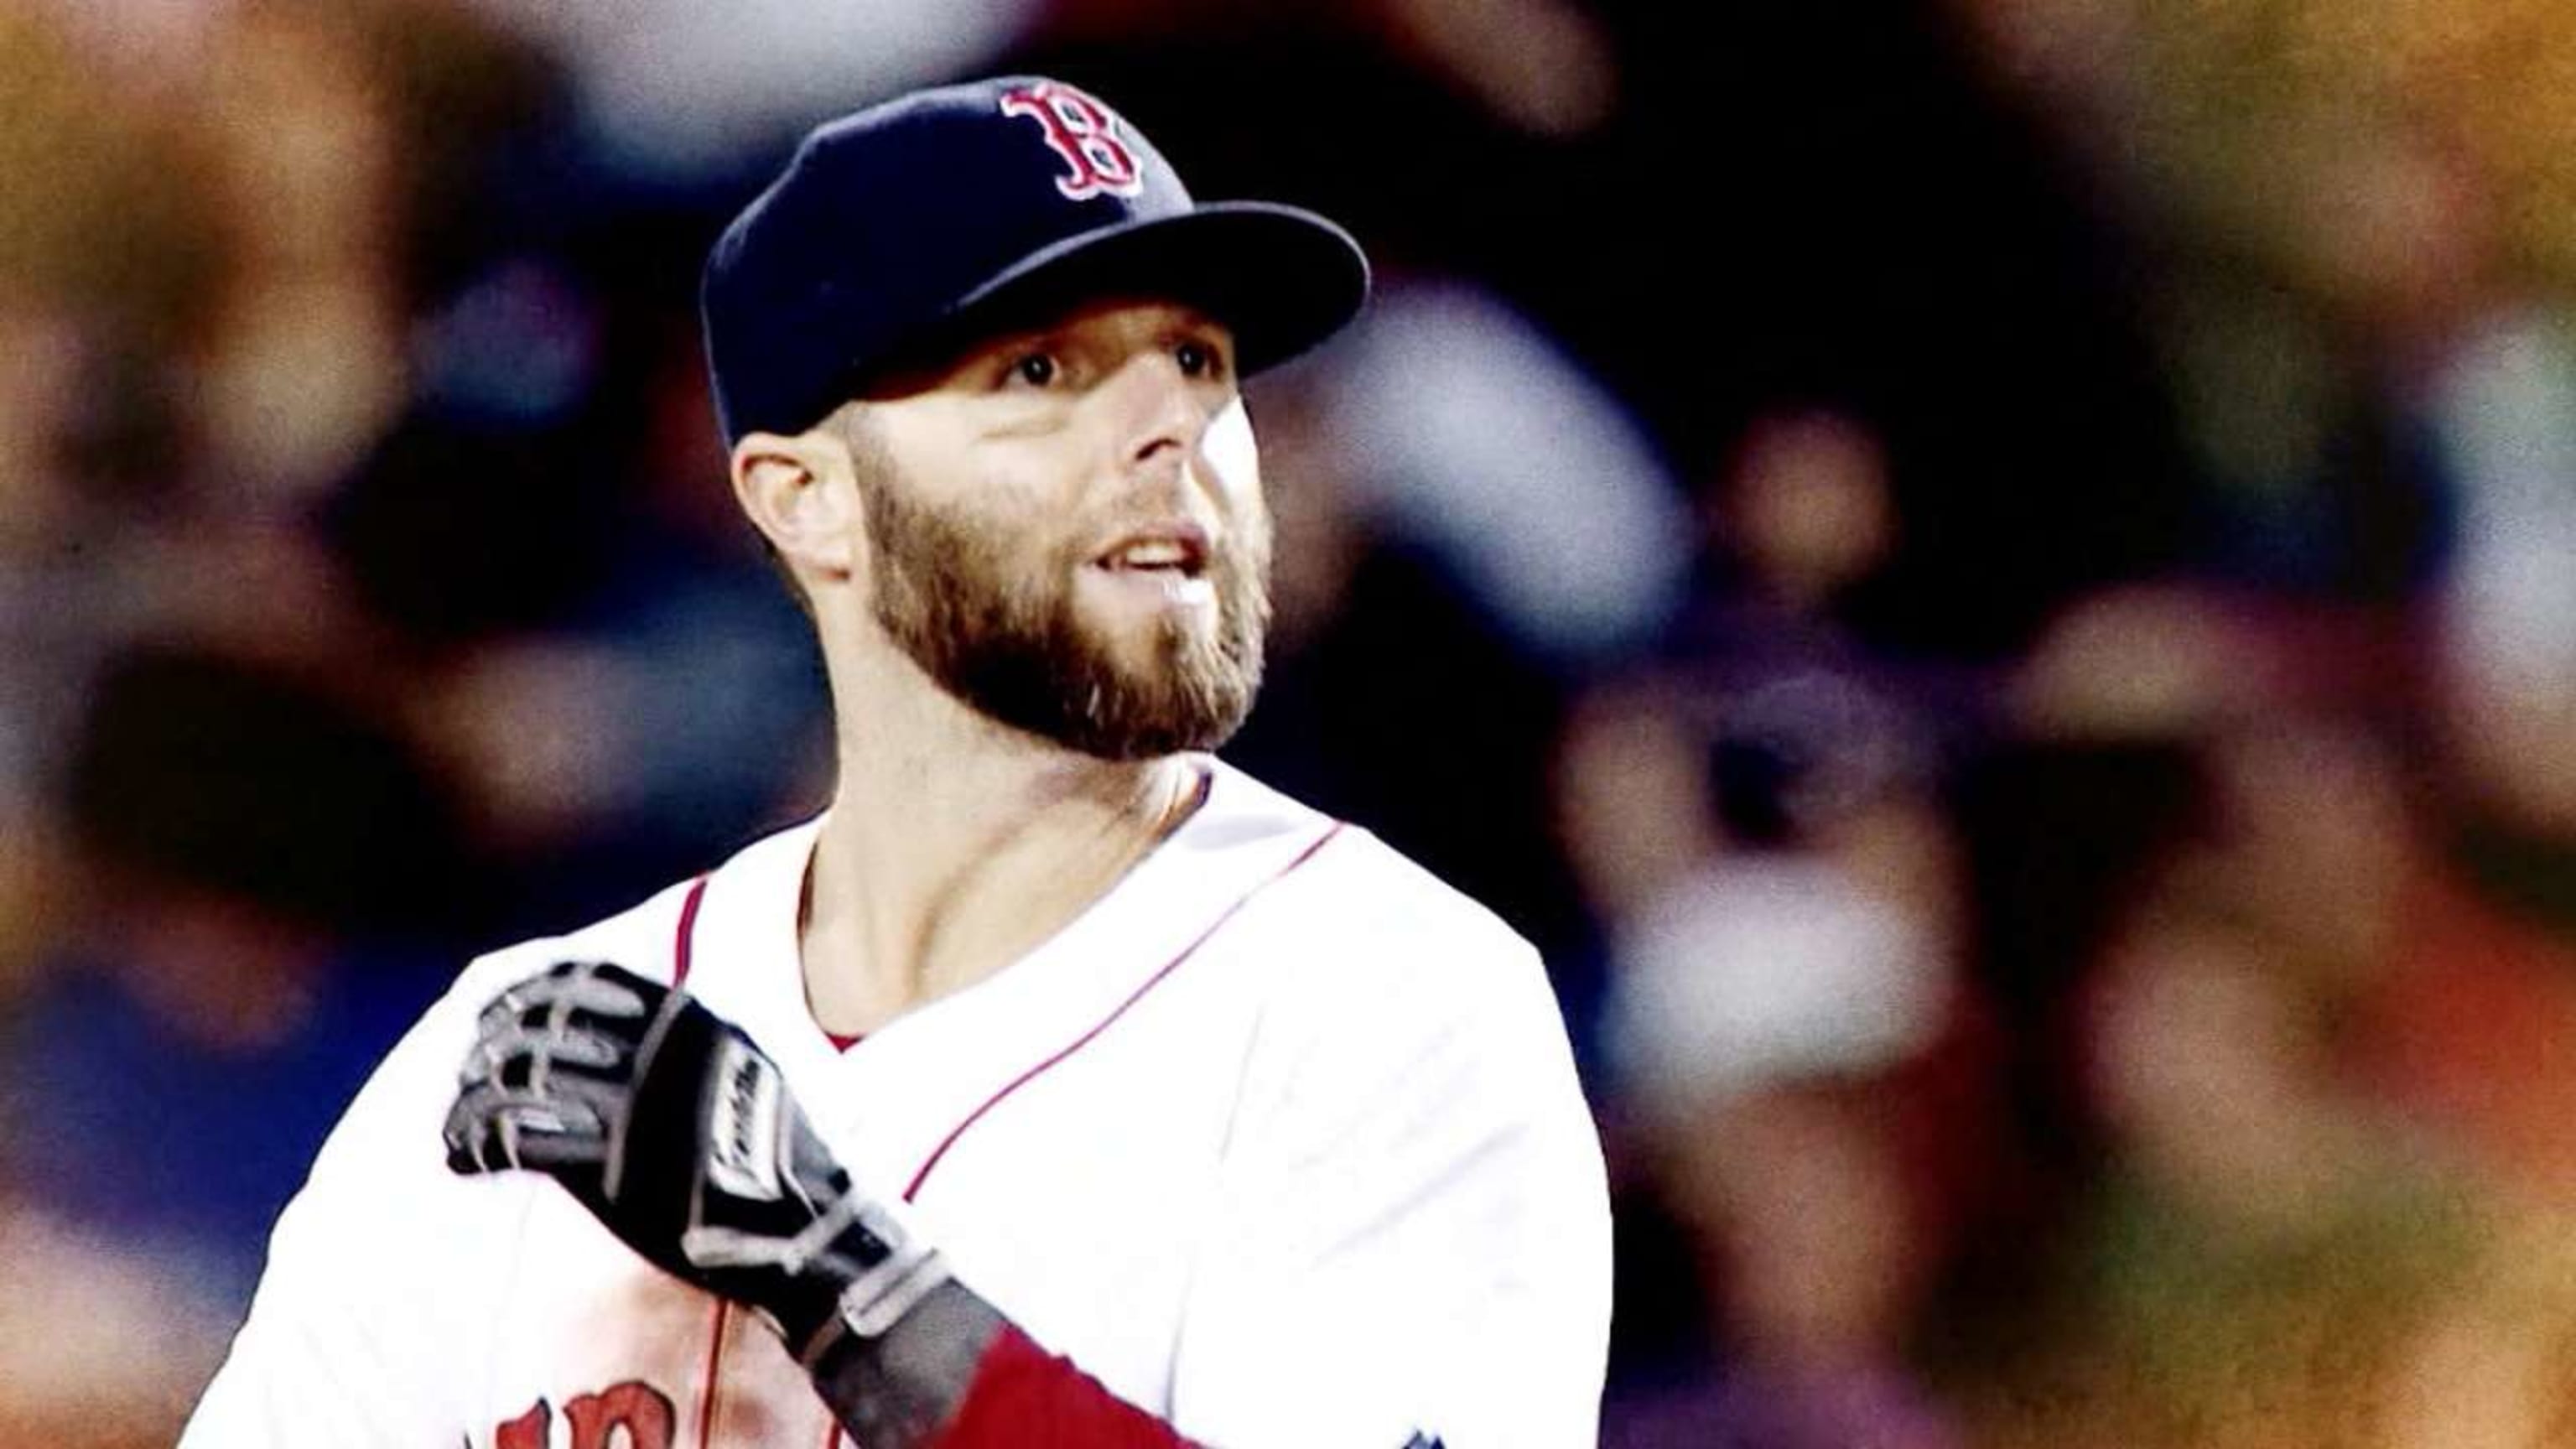 Red Sox: Before they were BoSox - Second baseman Dustin Pedroia